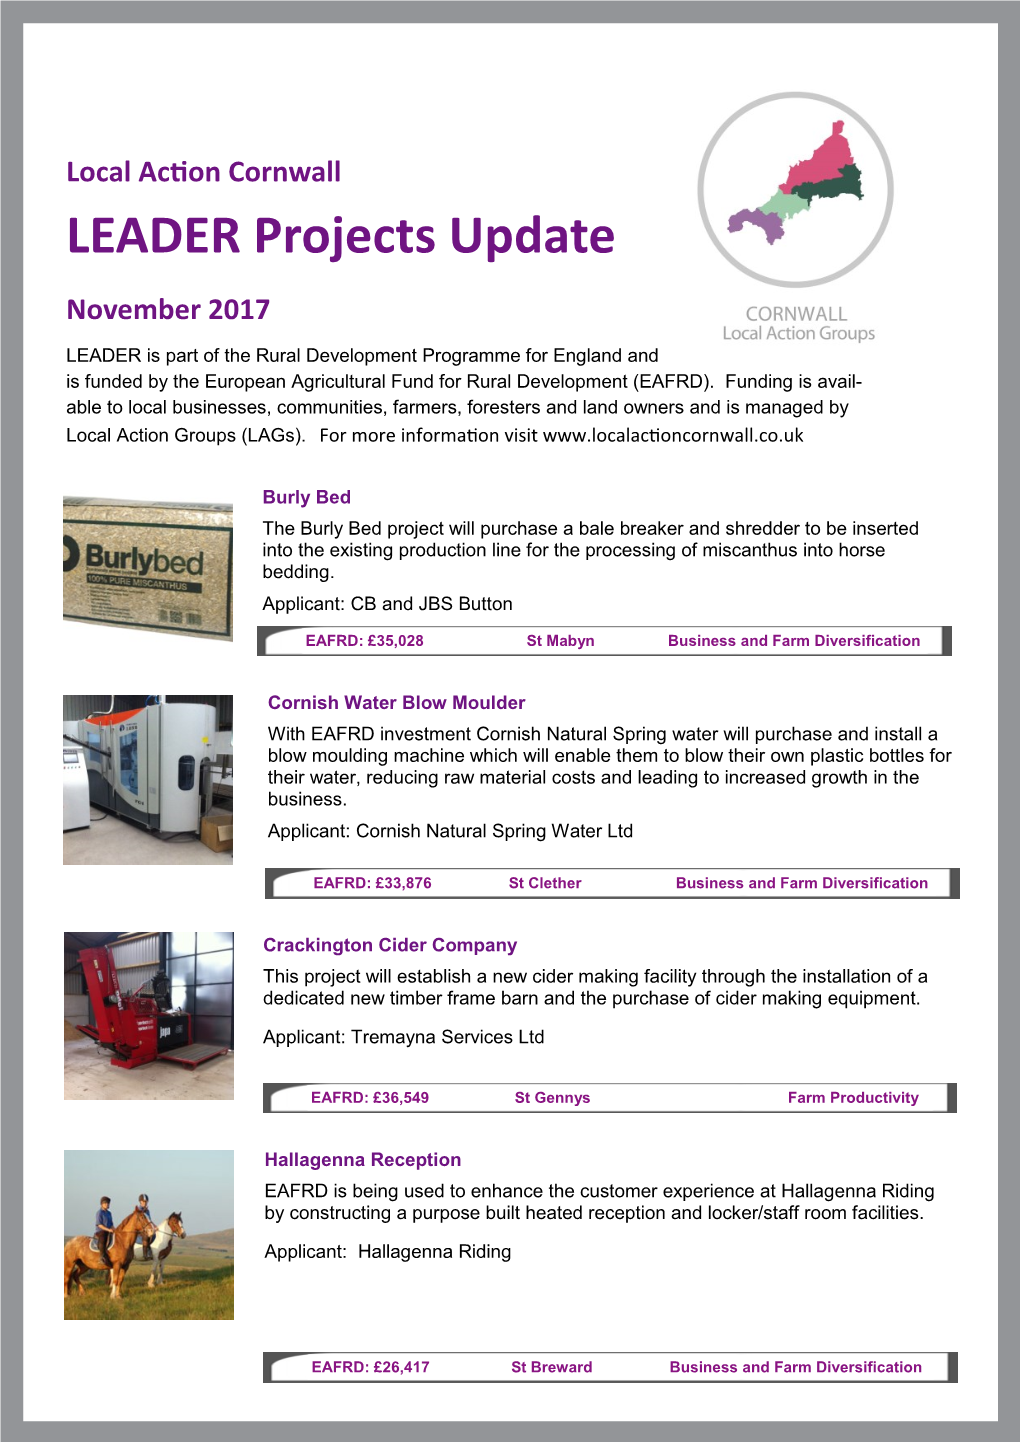 LEADER Projects Update November 2017